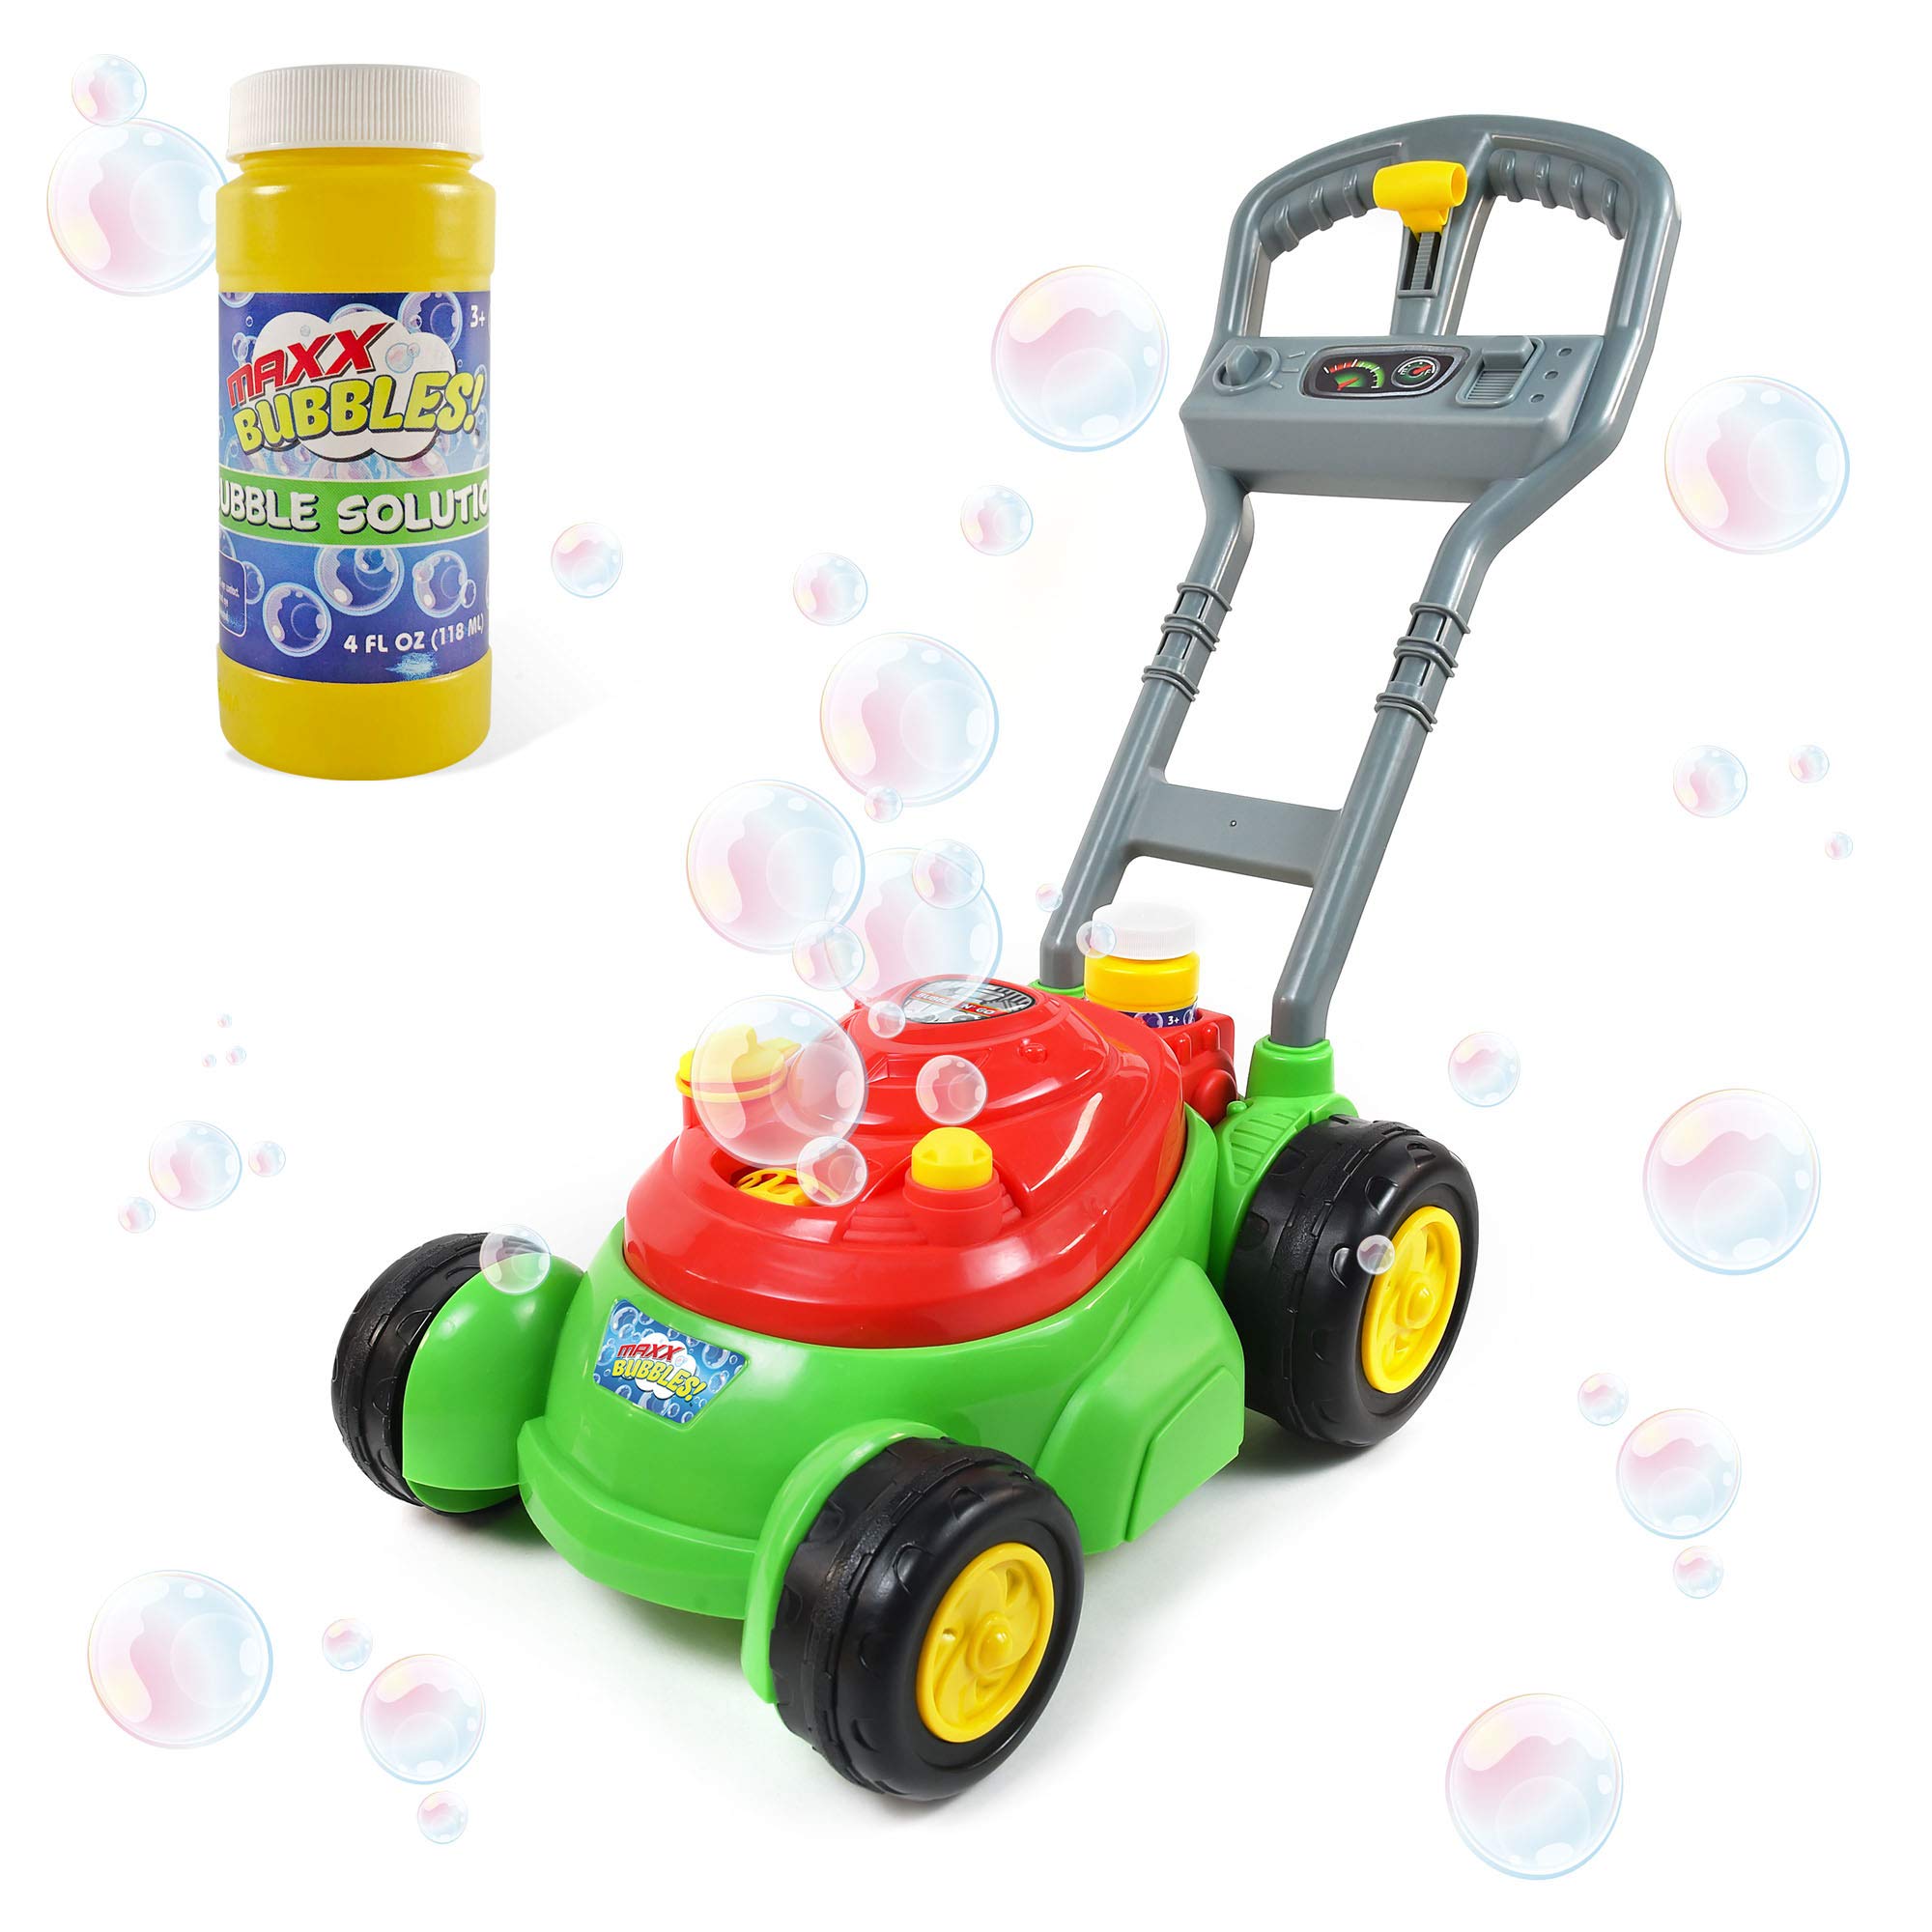 Maxx Bubbles Deluxe Bubble Lawn Mower Toy w/ 4oz Bubble Solution $10 + Free Shipping w/ Prime or on $35+